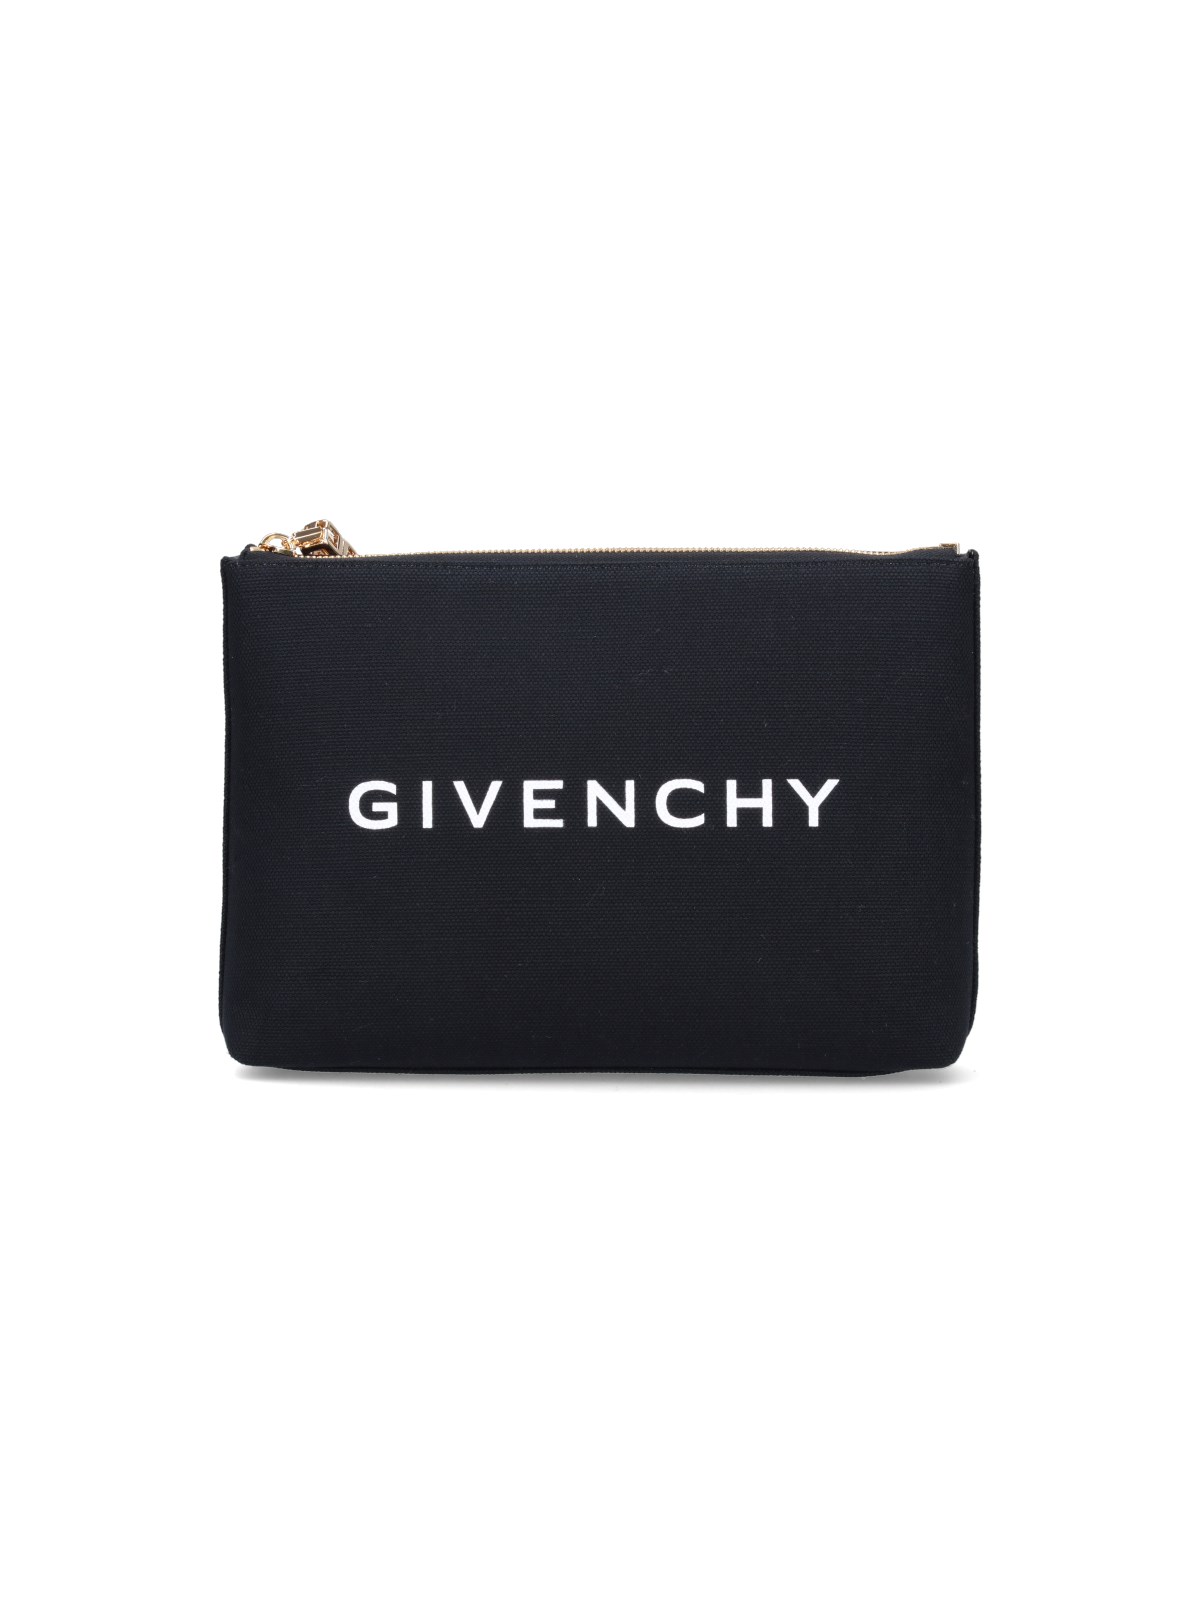 Givenchy Logo Pouch In Black  